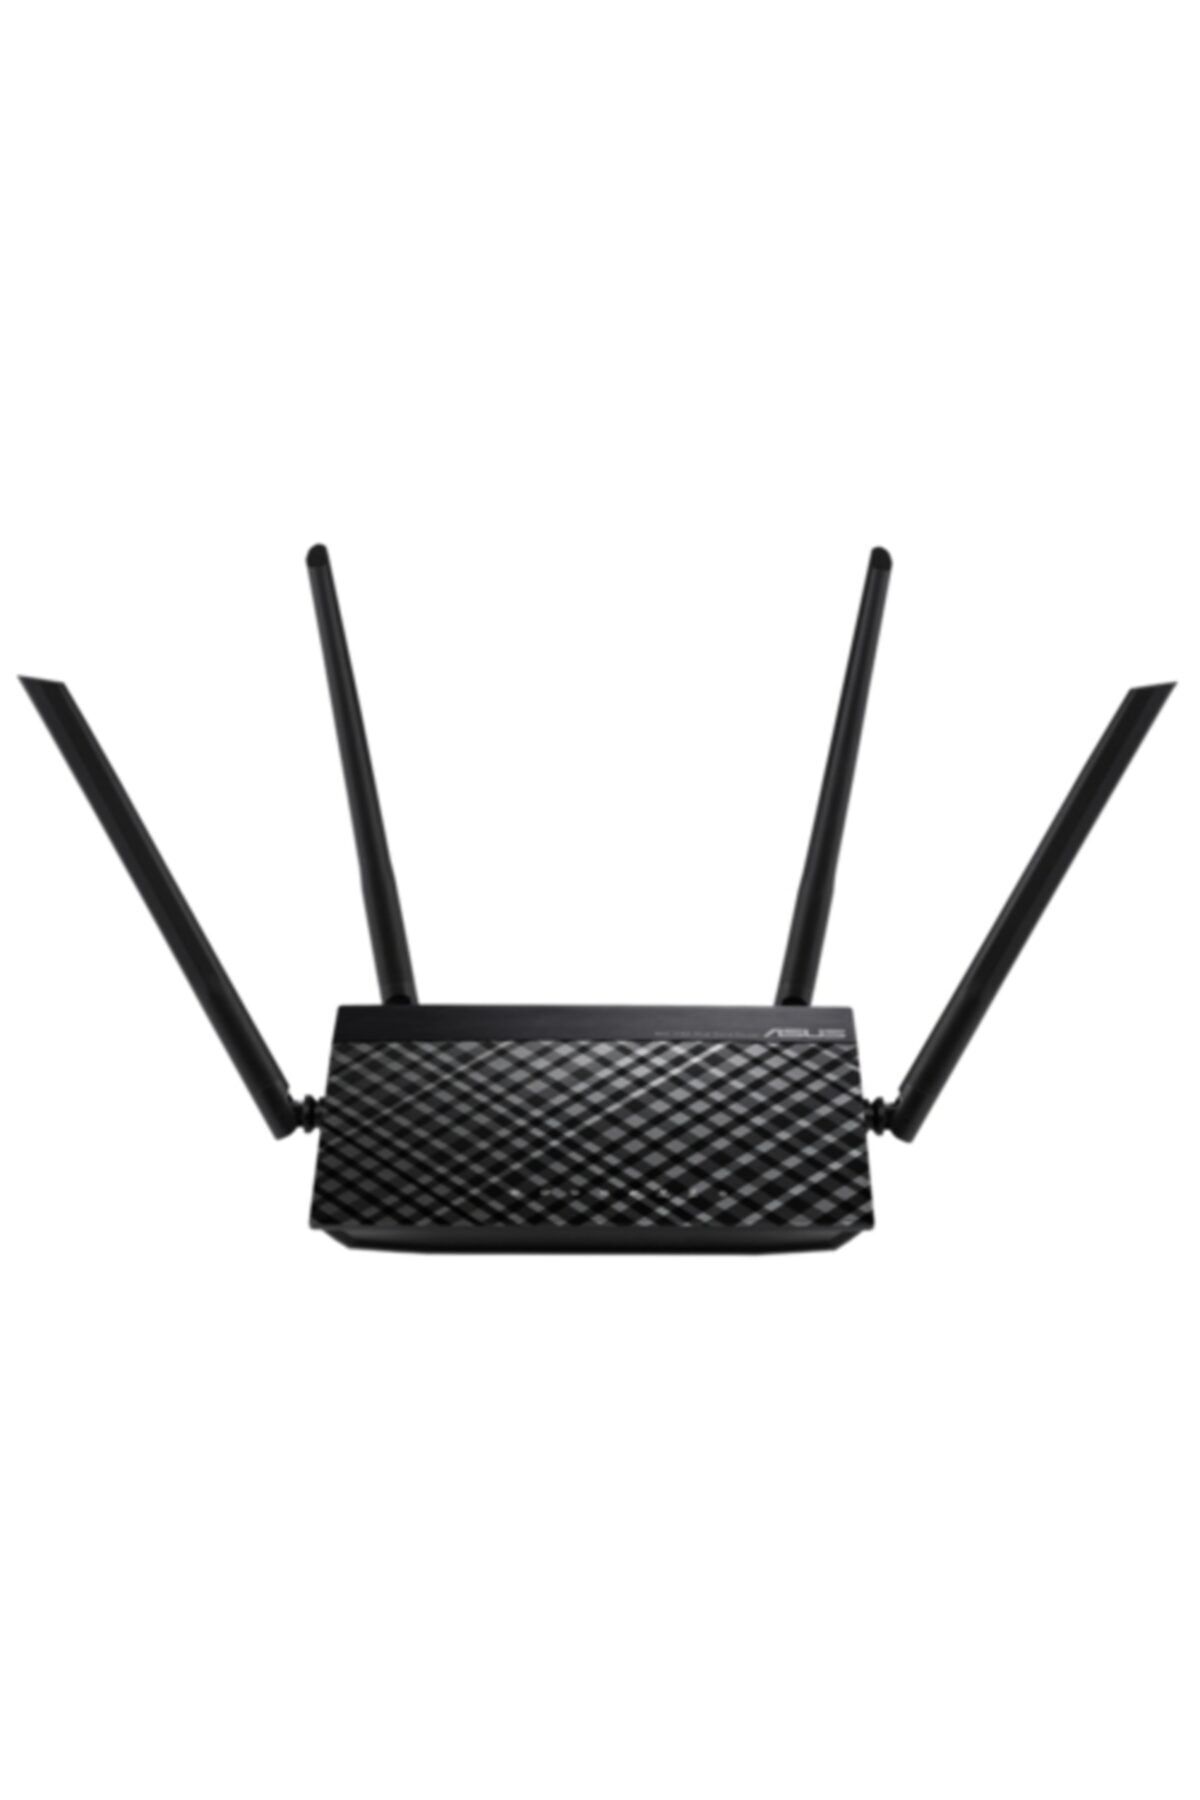 ASUS Rt-ac51 Dual Band Ac750 Router/access Point